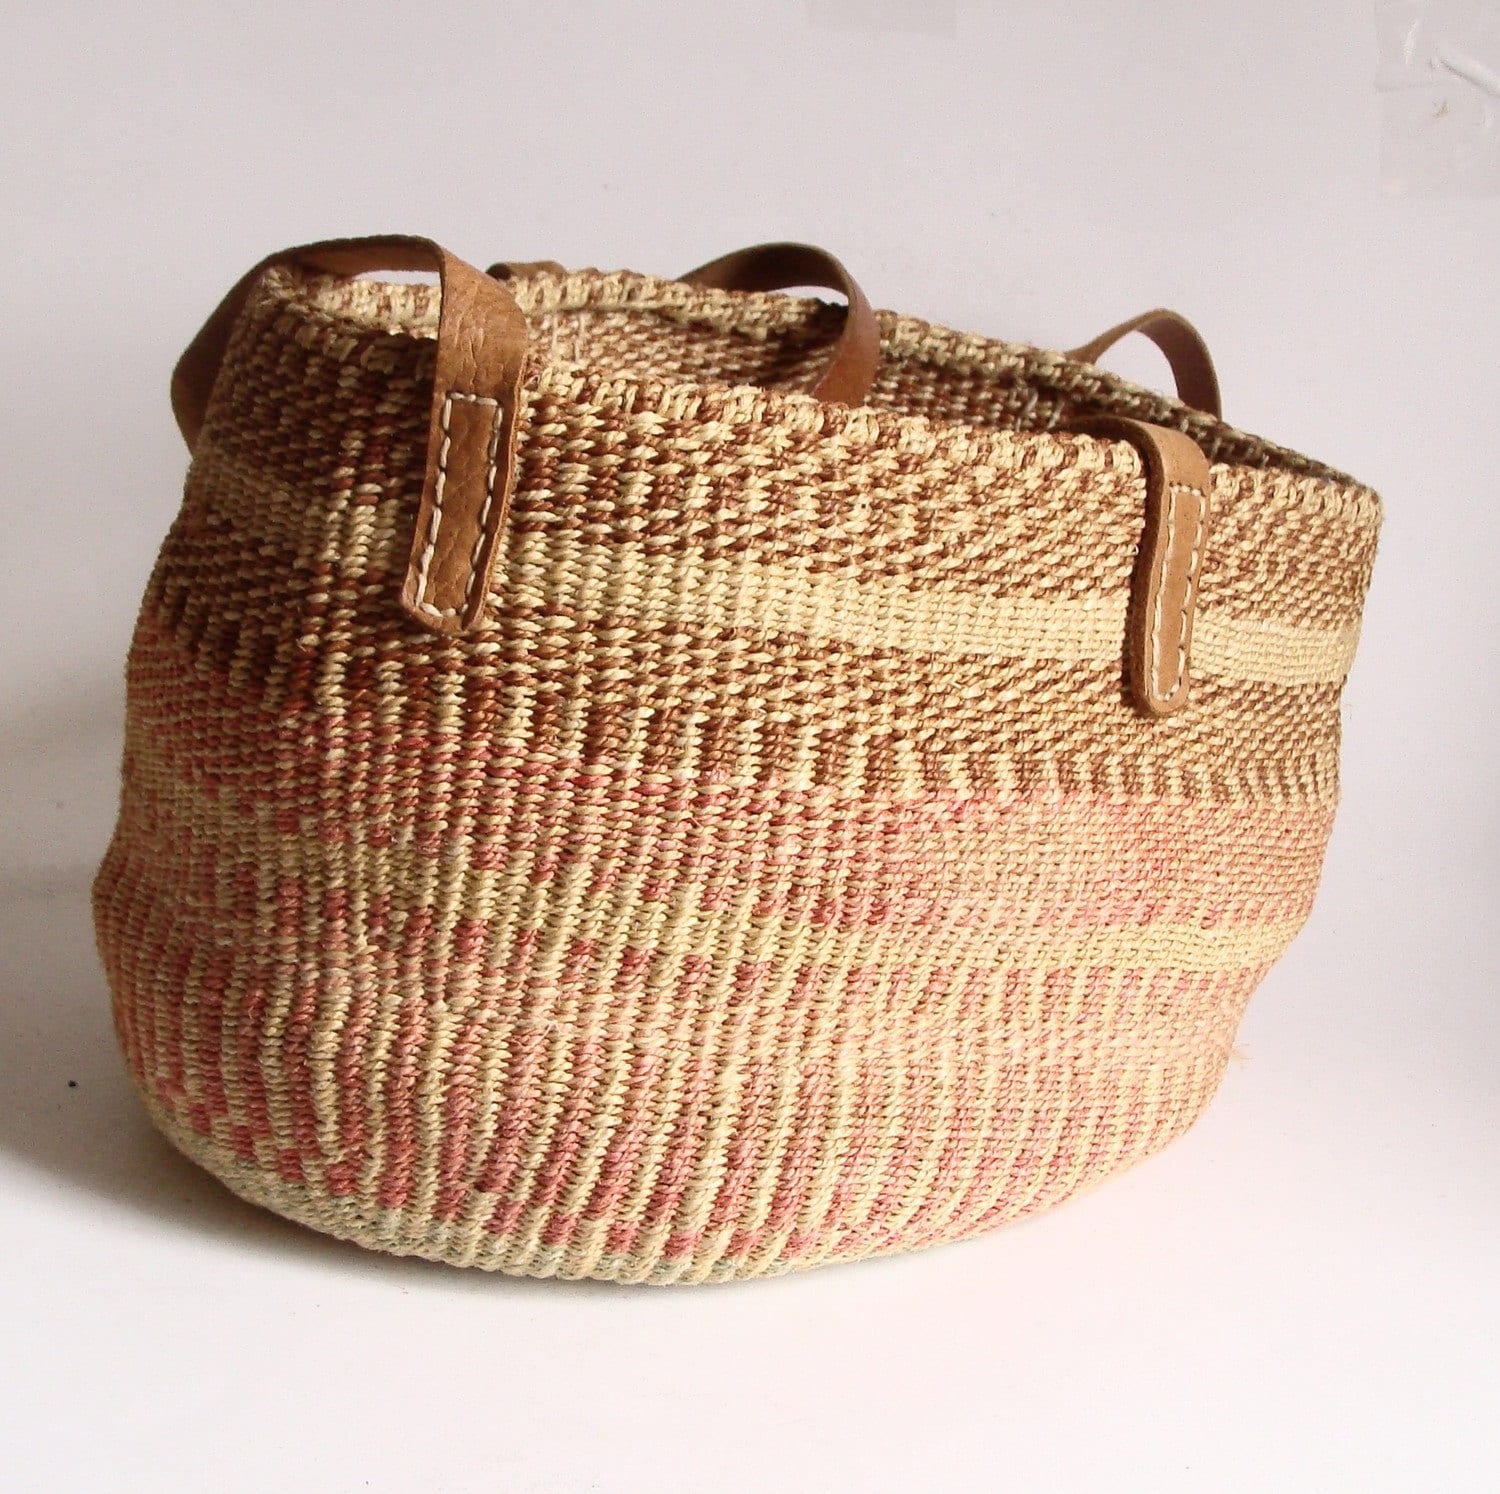 Round Straw Handbag With Leather Straps | Confederated Tribes of the Umatilla Indian Reservation